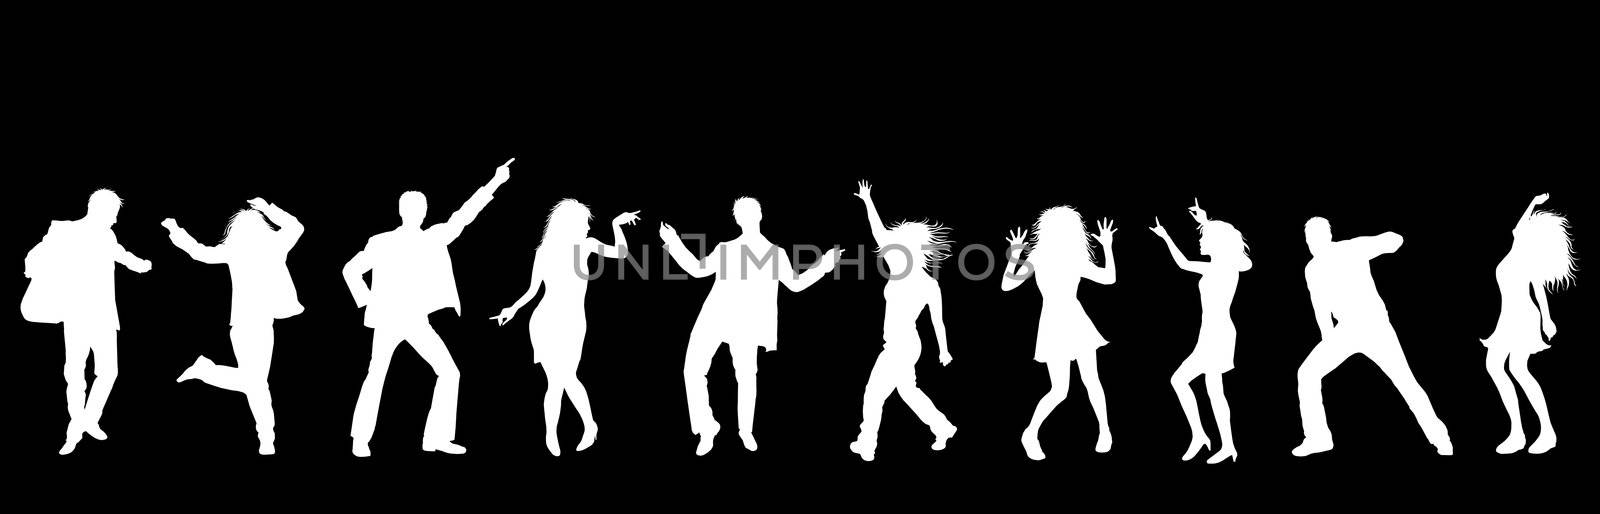 Dancing silhouettes by peromarketing